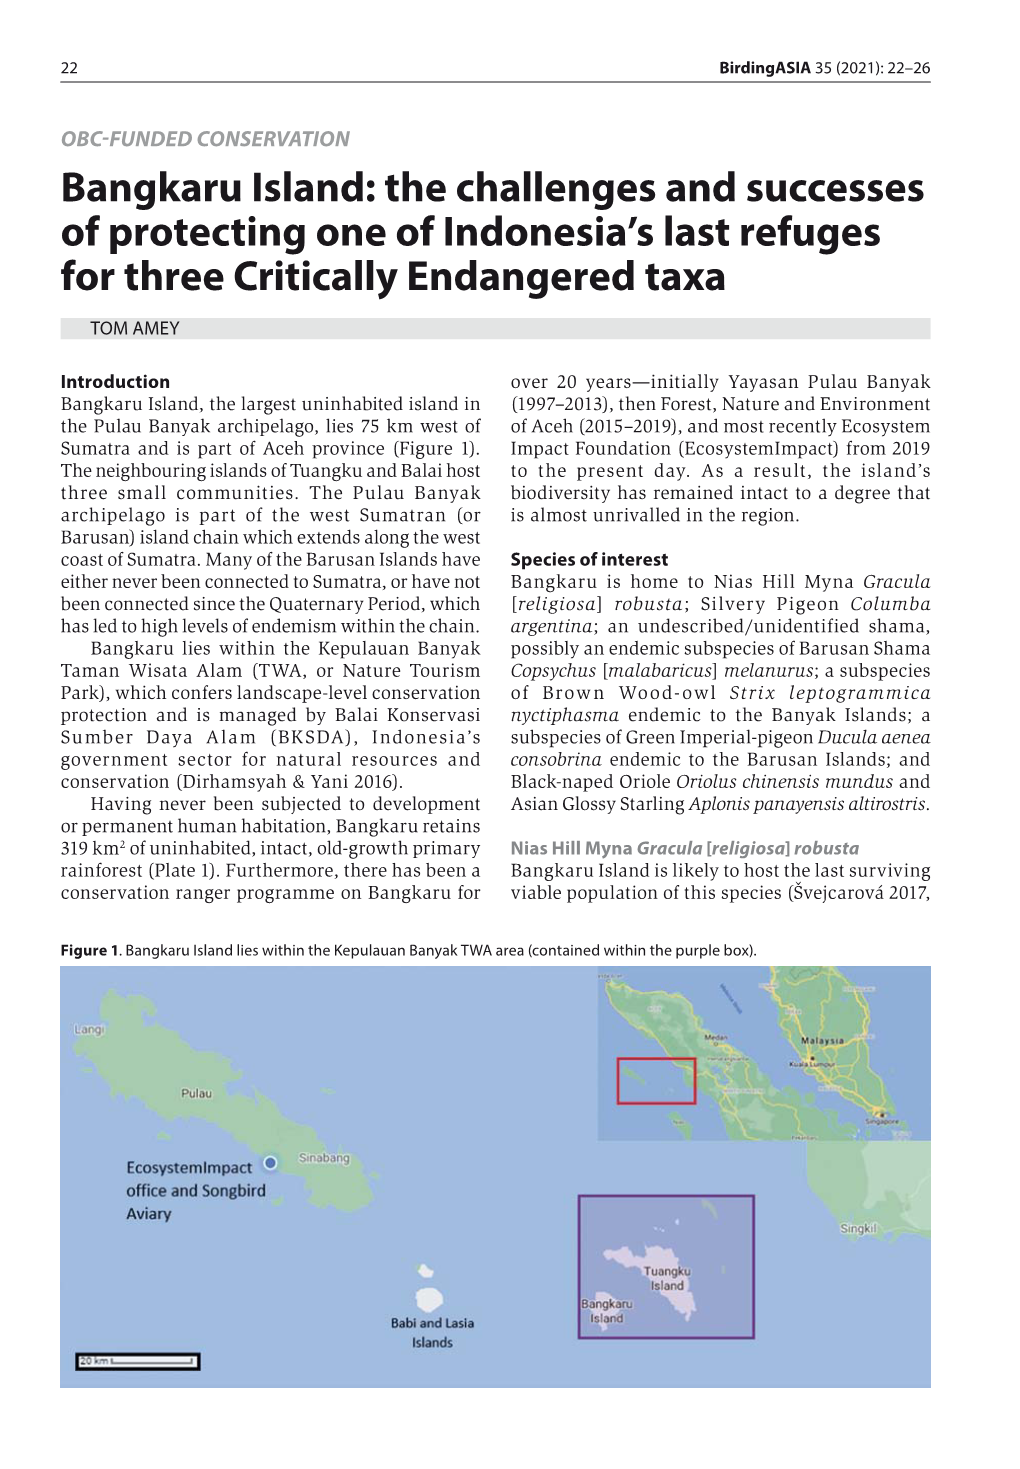 Bangkaru Island: the Challenges and Successes of Protecting One of Indonesia’S Last Refuges for Three Critically Endangered Taxa